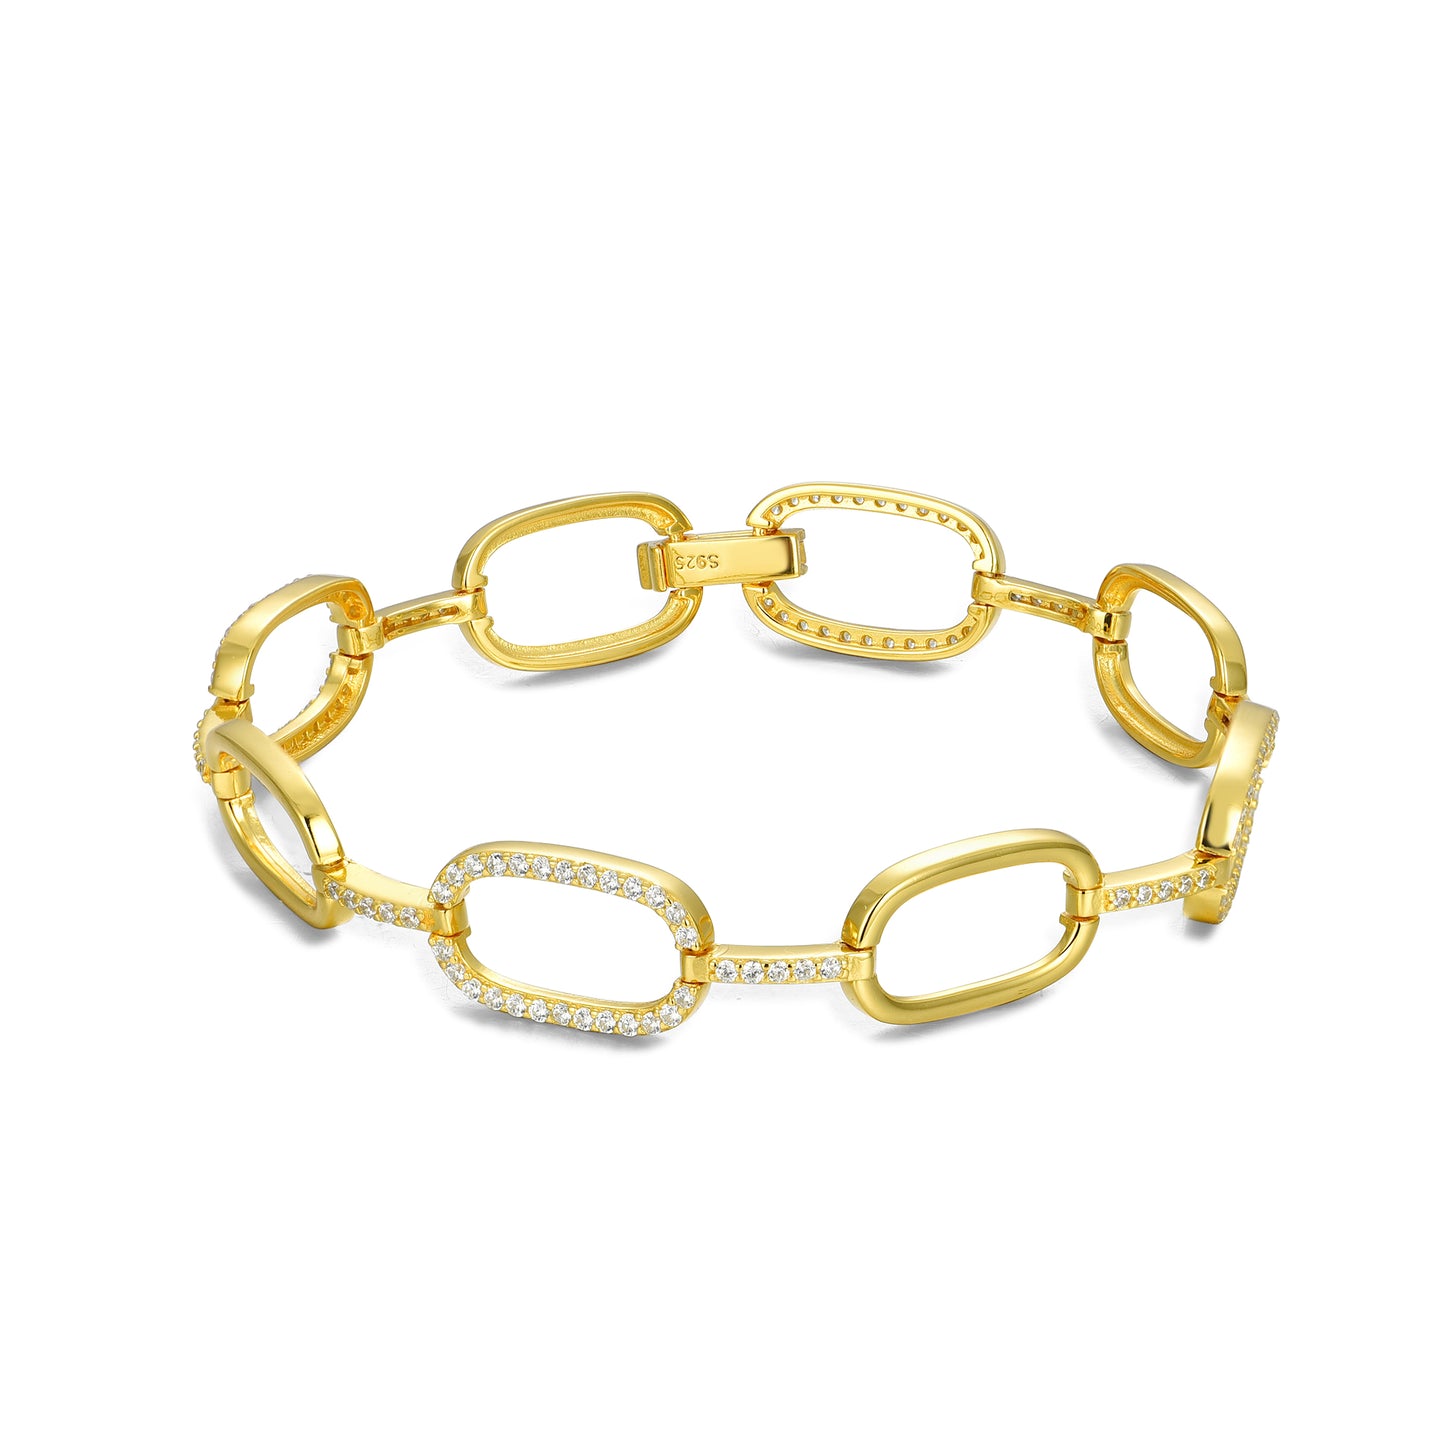 Rhodium or Gold-Plated Sterling Silver Micropave CZ Oval Link Bracelet